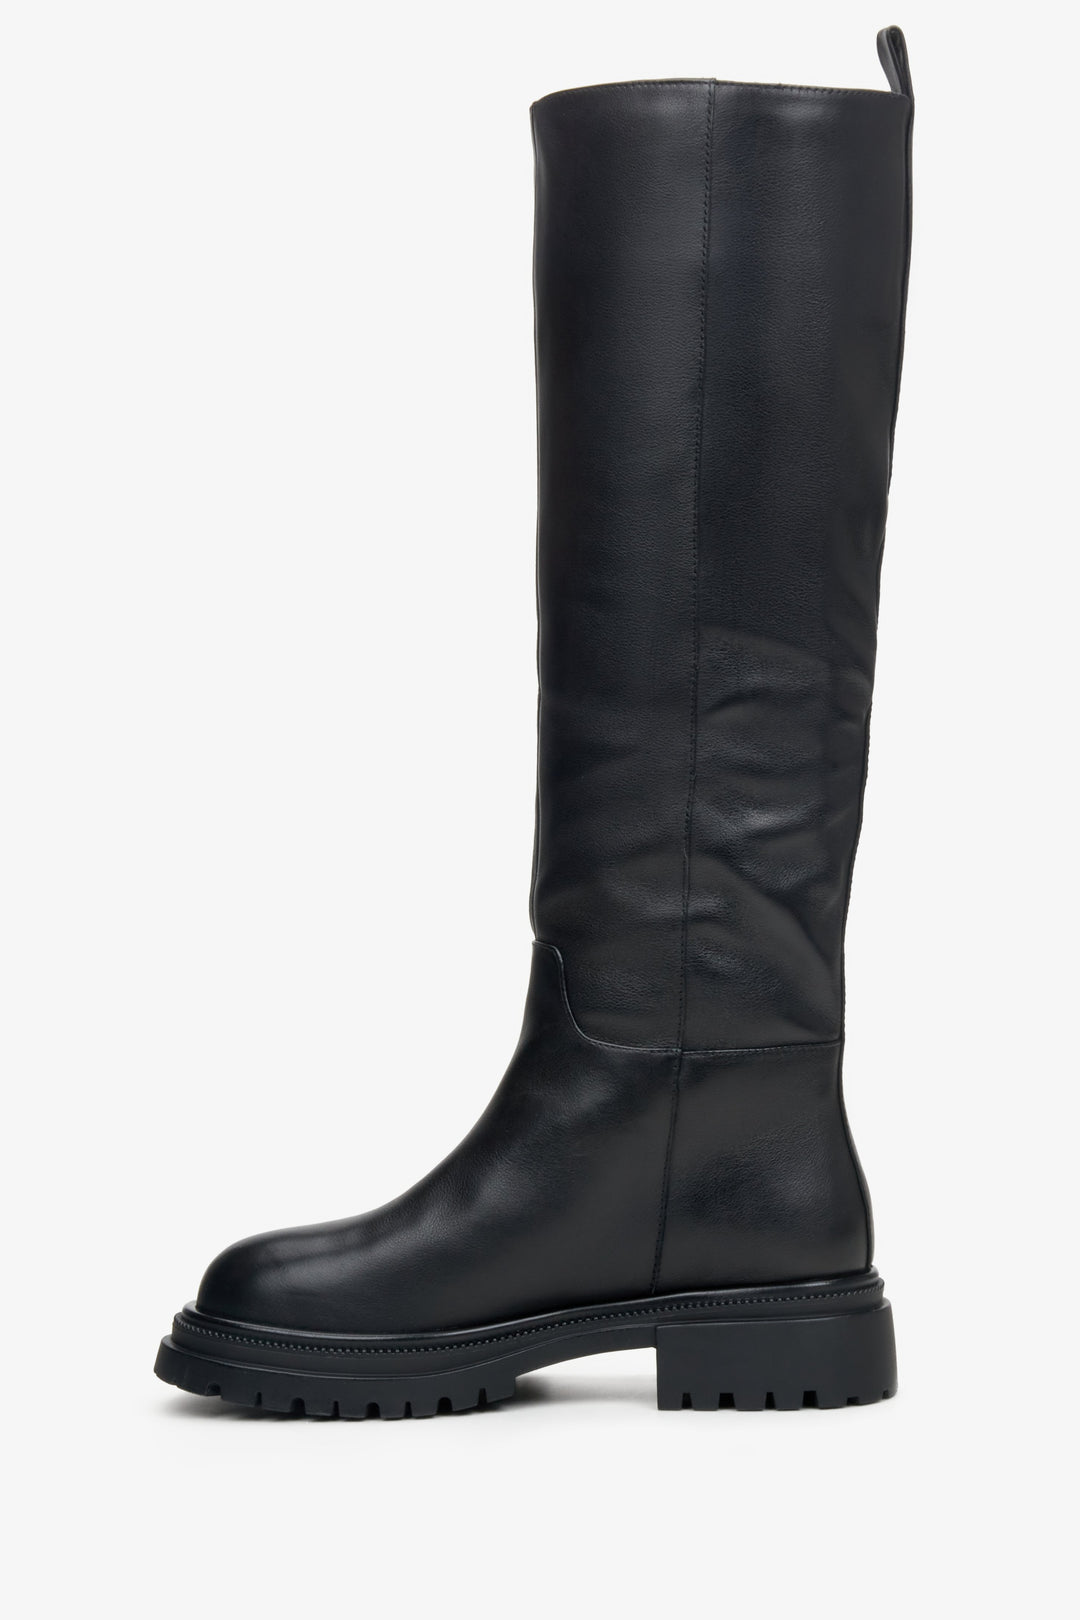 Women's black boots made of genuine leather by Estro - shoe profile.